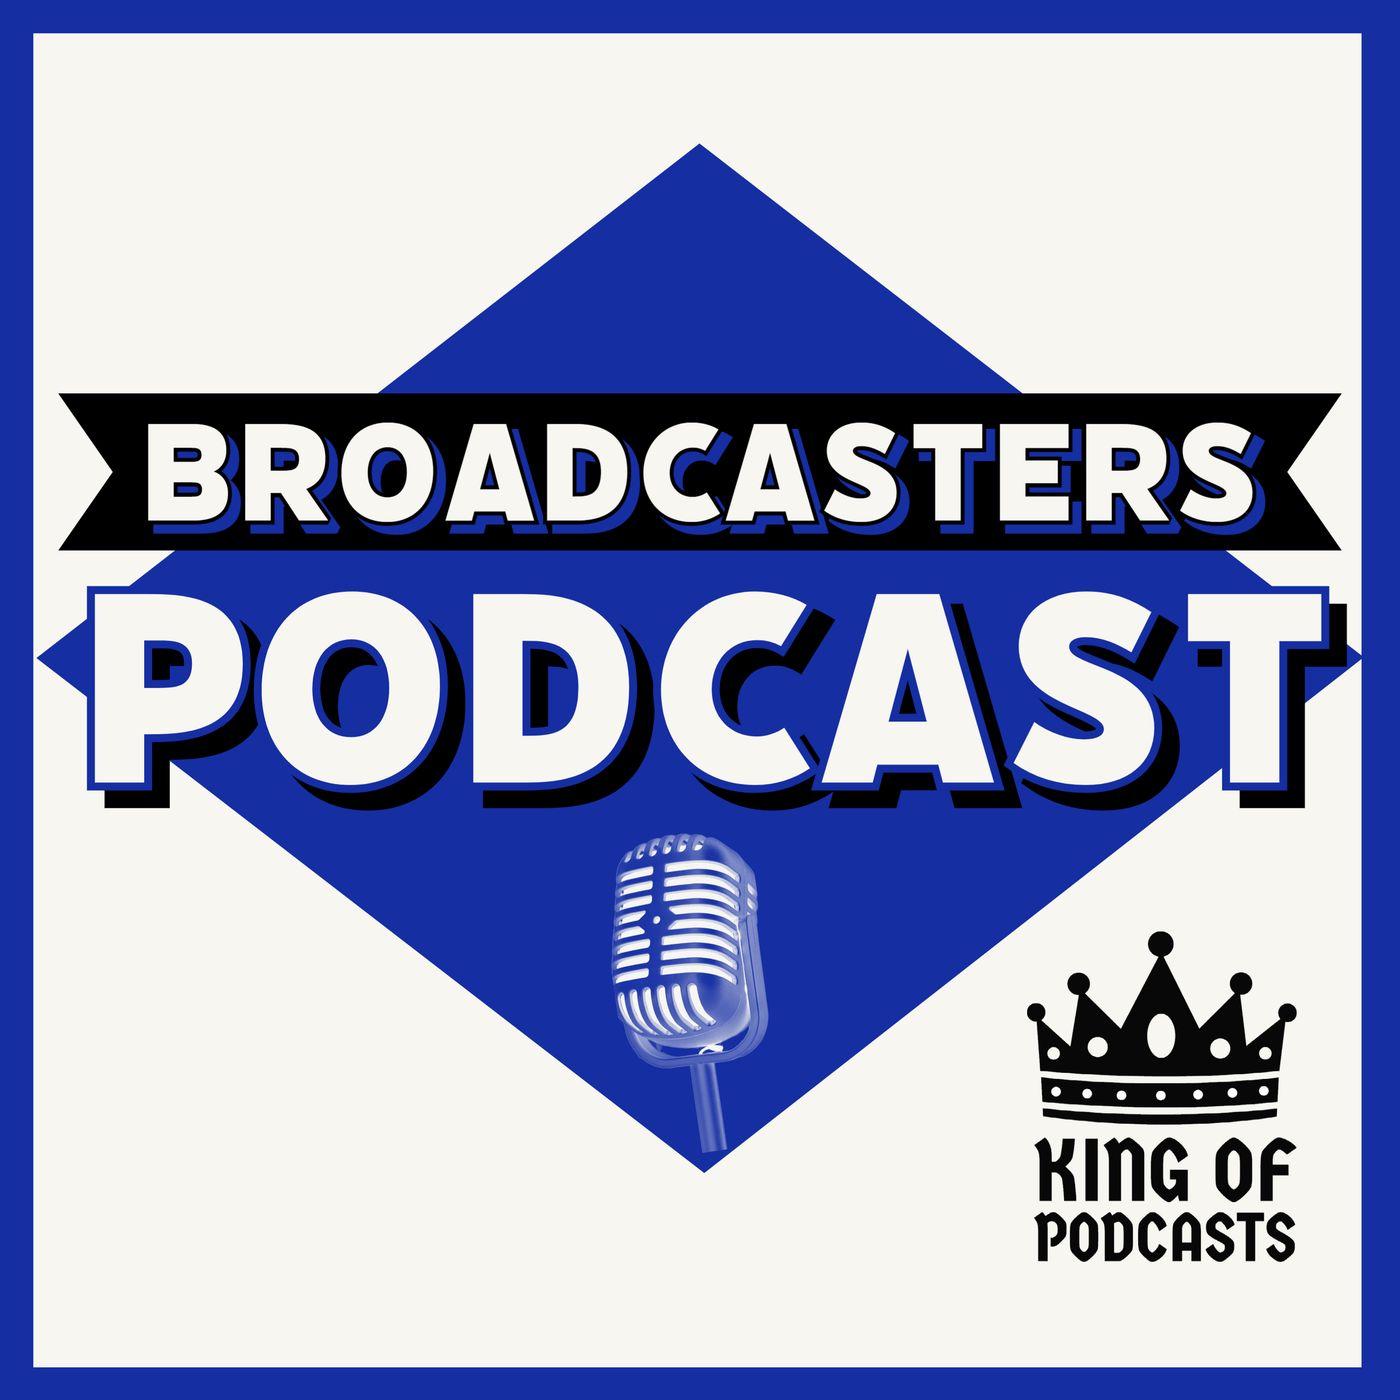 The Broadcasters Podcast